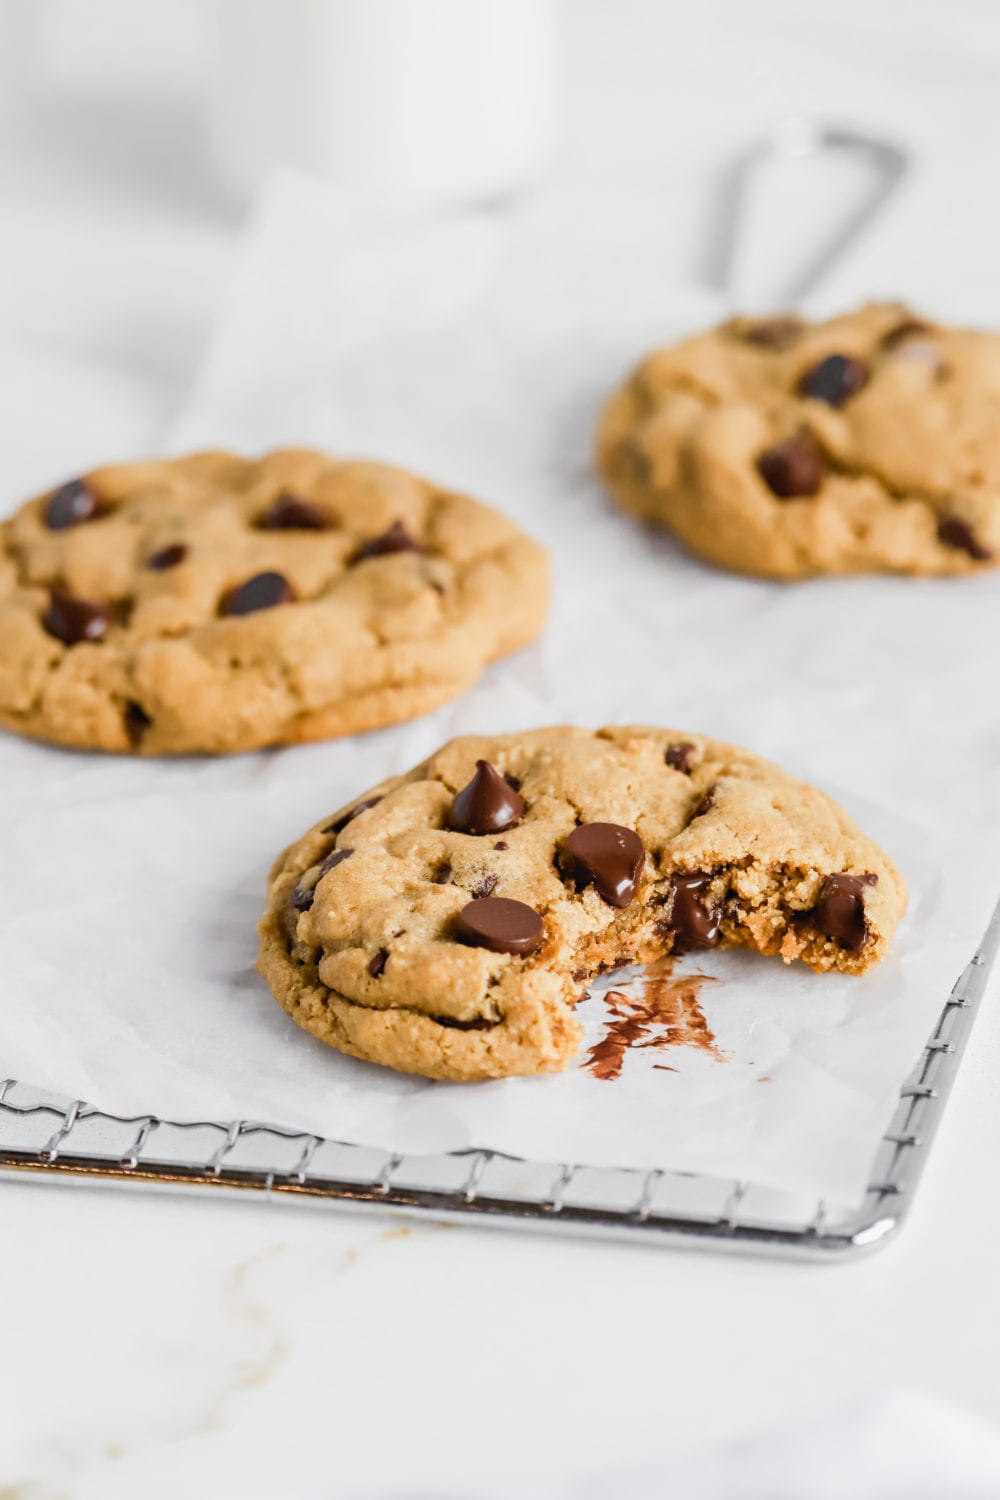 https://basicswithbails.com/wp-content/uploads/2020/06/vegan-gluten-free-healthy-chocolate-chip-cookies-with-oat-flour-and-almond-flour-scaled.jpg